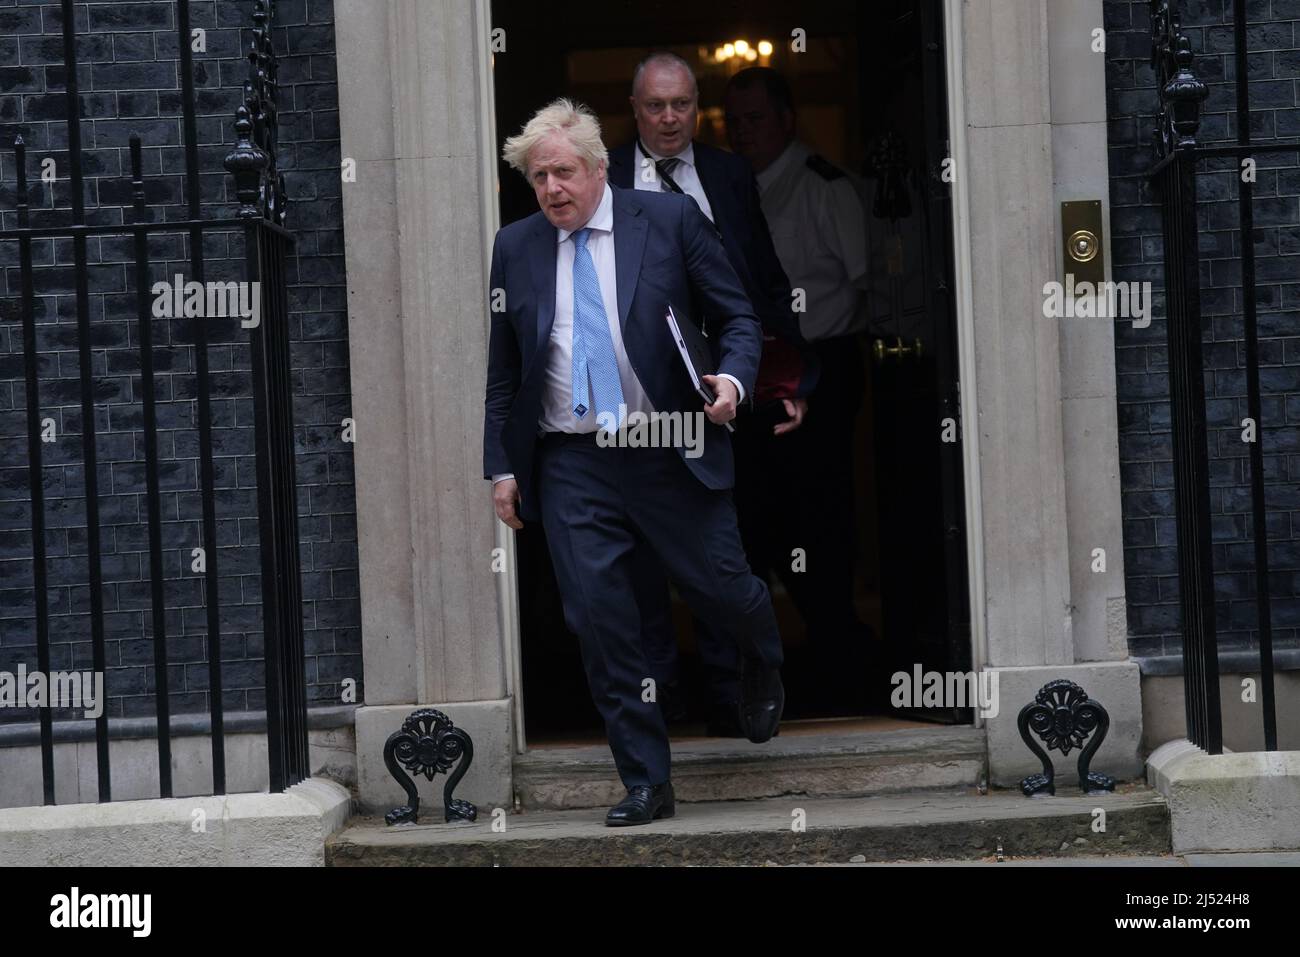 Prime Minister Boris Johnson leaves 10 Downing Street, London, to head to the House of Commons where he is due to make a statement to MPs following the announcement that he is among the 50-plus people fined so far as part of the Metropolitan Police probe into Covid breaches in Government. Picture date: Tuesday April 19, 2022. Stock Photo